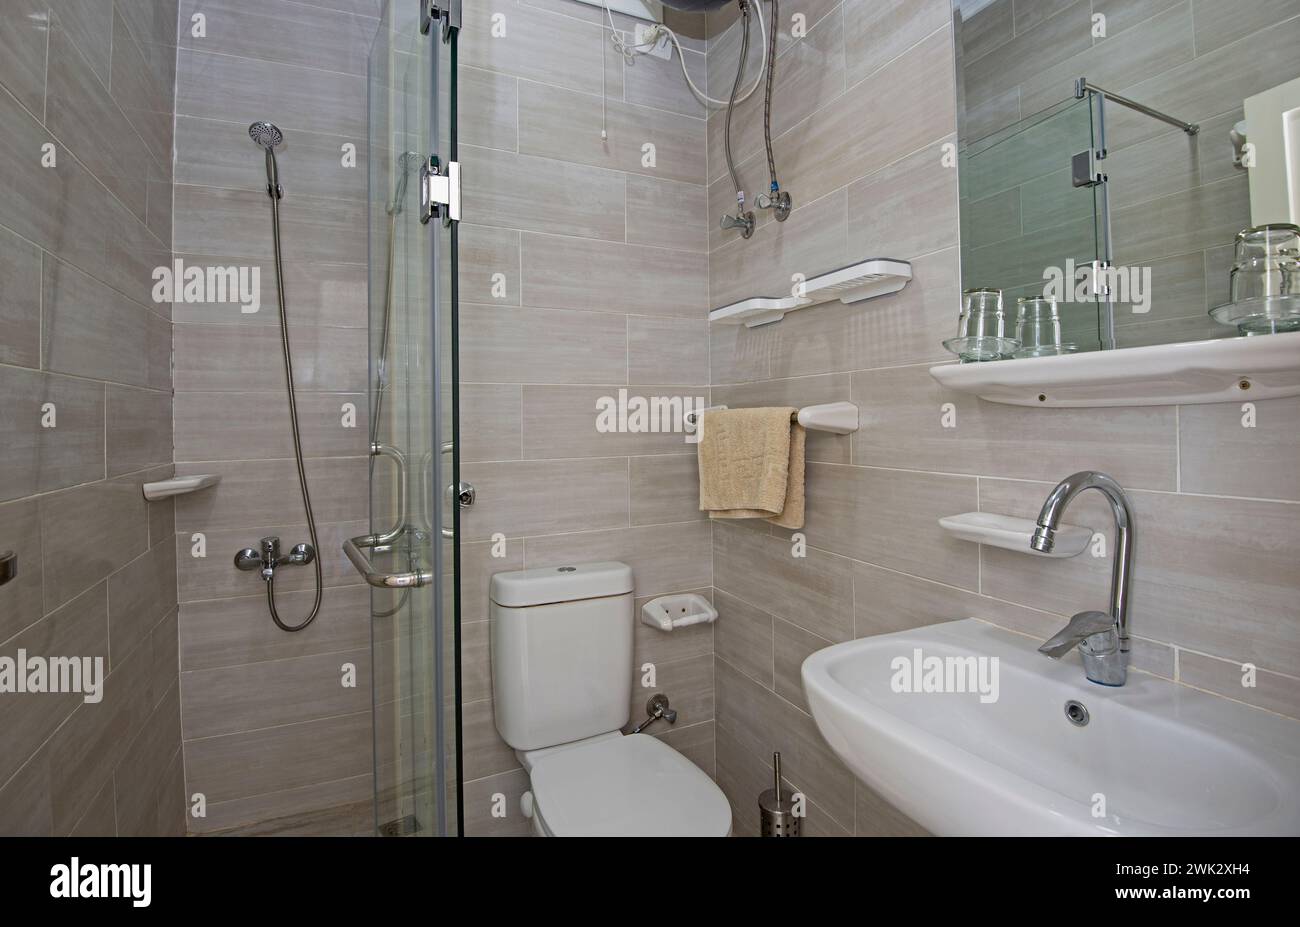 Interior design of a luxury show home bathroom with shower cubicle and sink Stock Photo